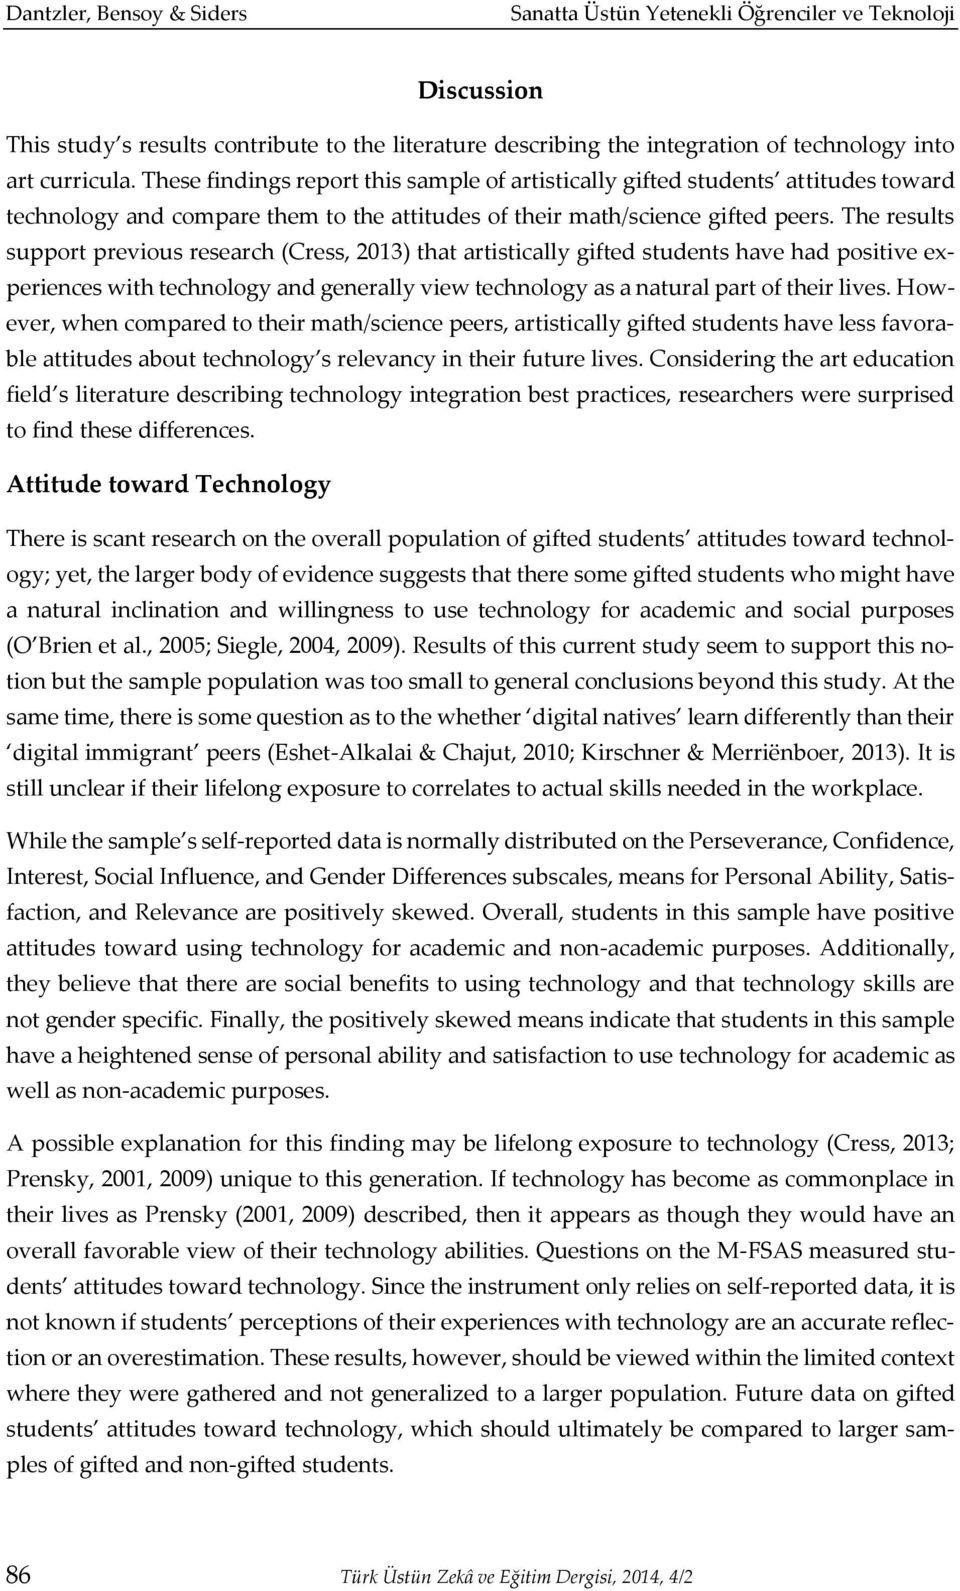 The results support previous research (Cress, 2013) that artistically gifted students have had positive experiences with technology and generally view technology as a natural part of their lives.